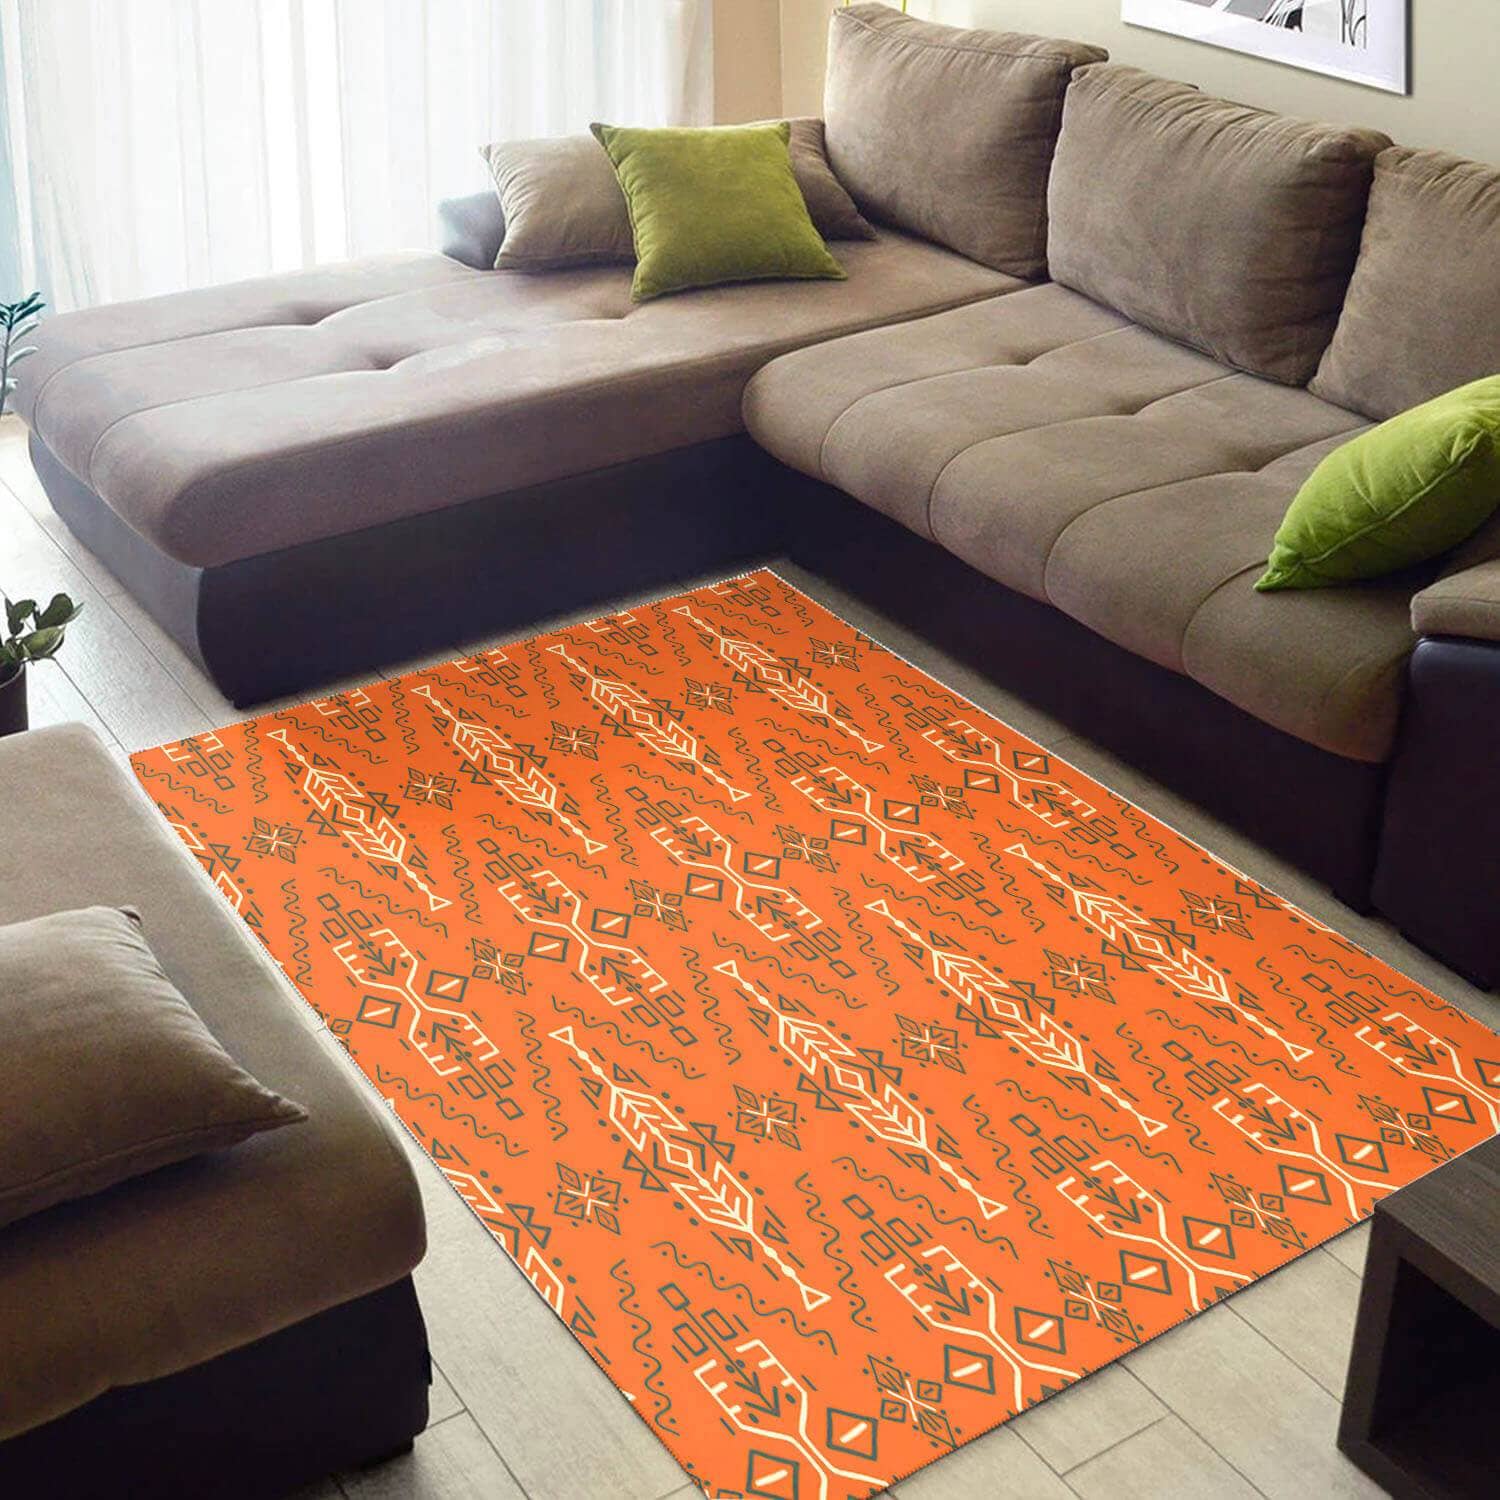 Nice African Holiday Afro American Seamless Pattern Design Floor Carpet Style Rug